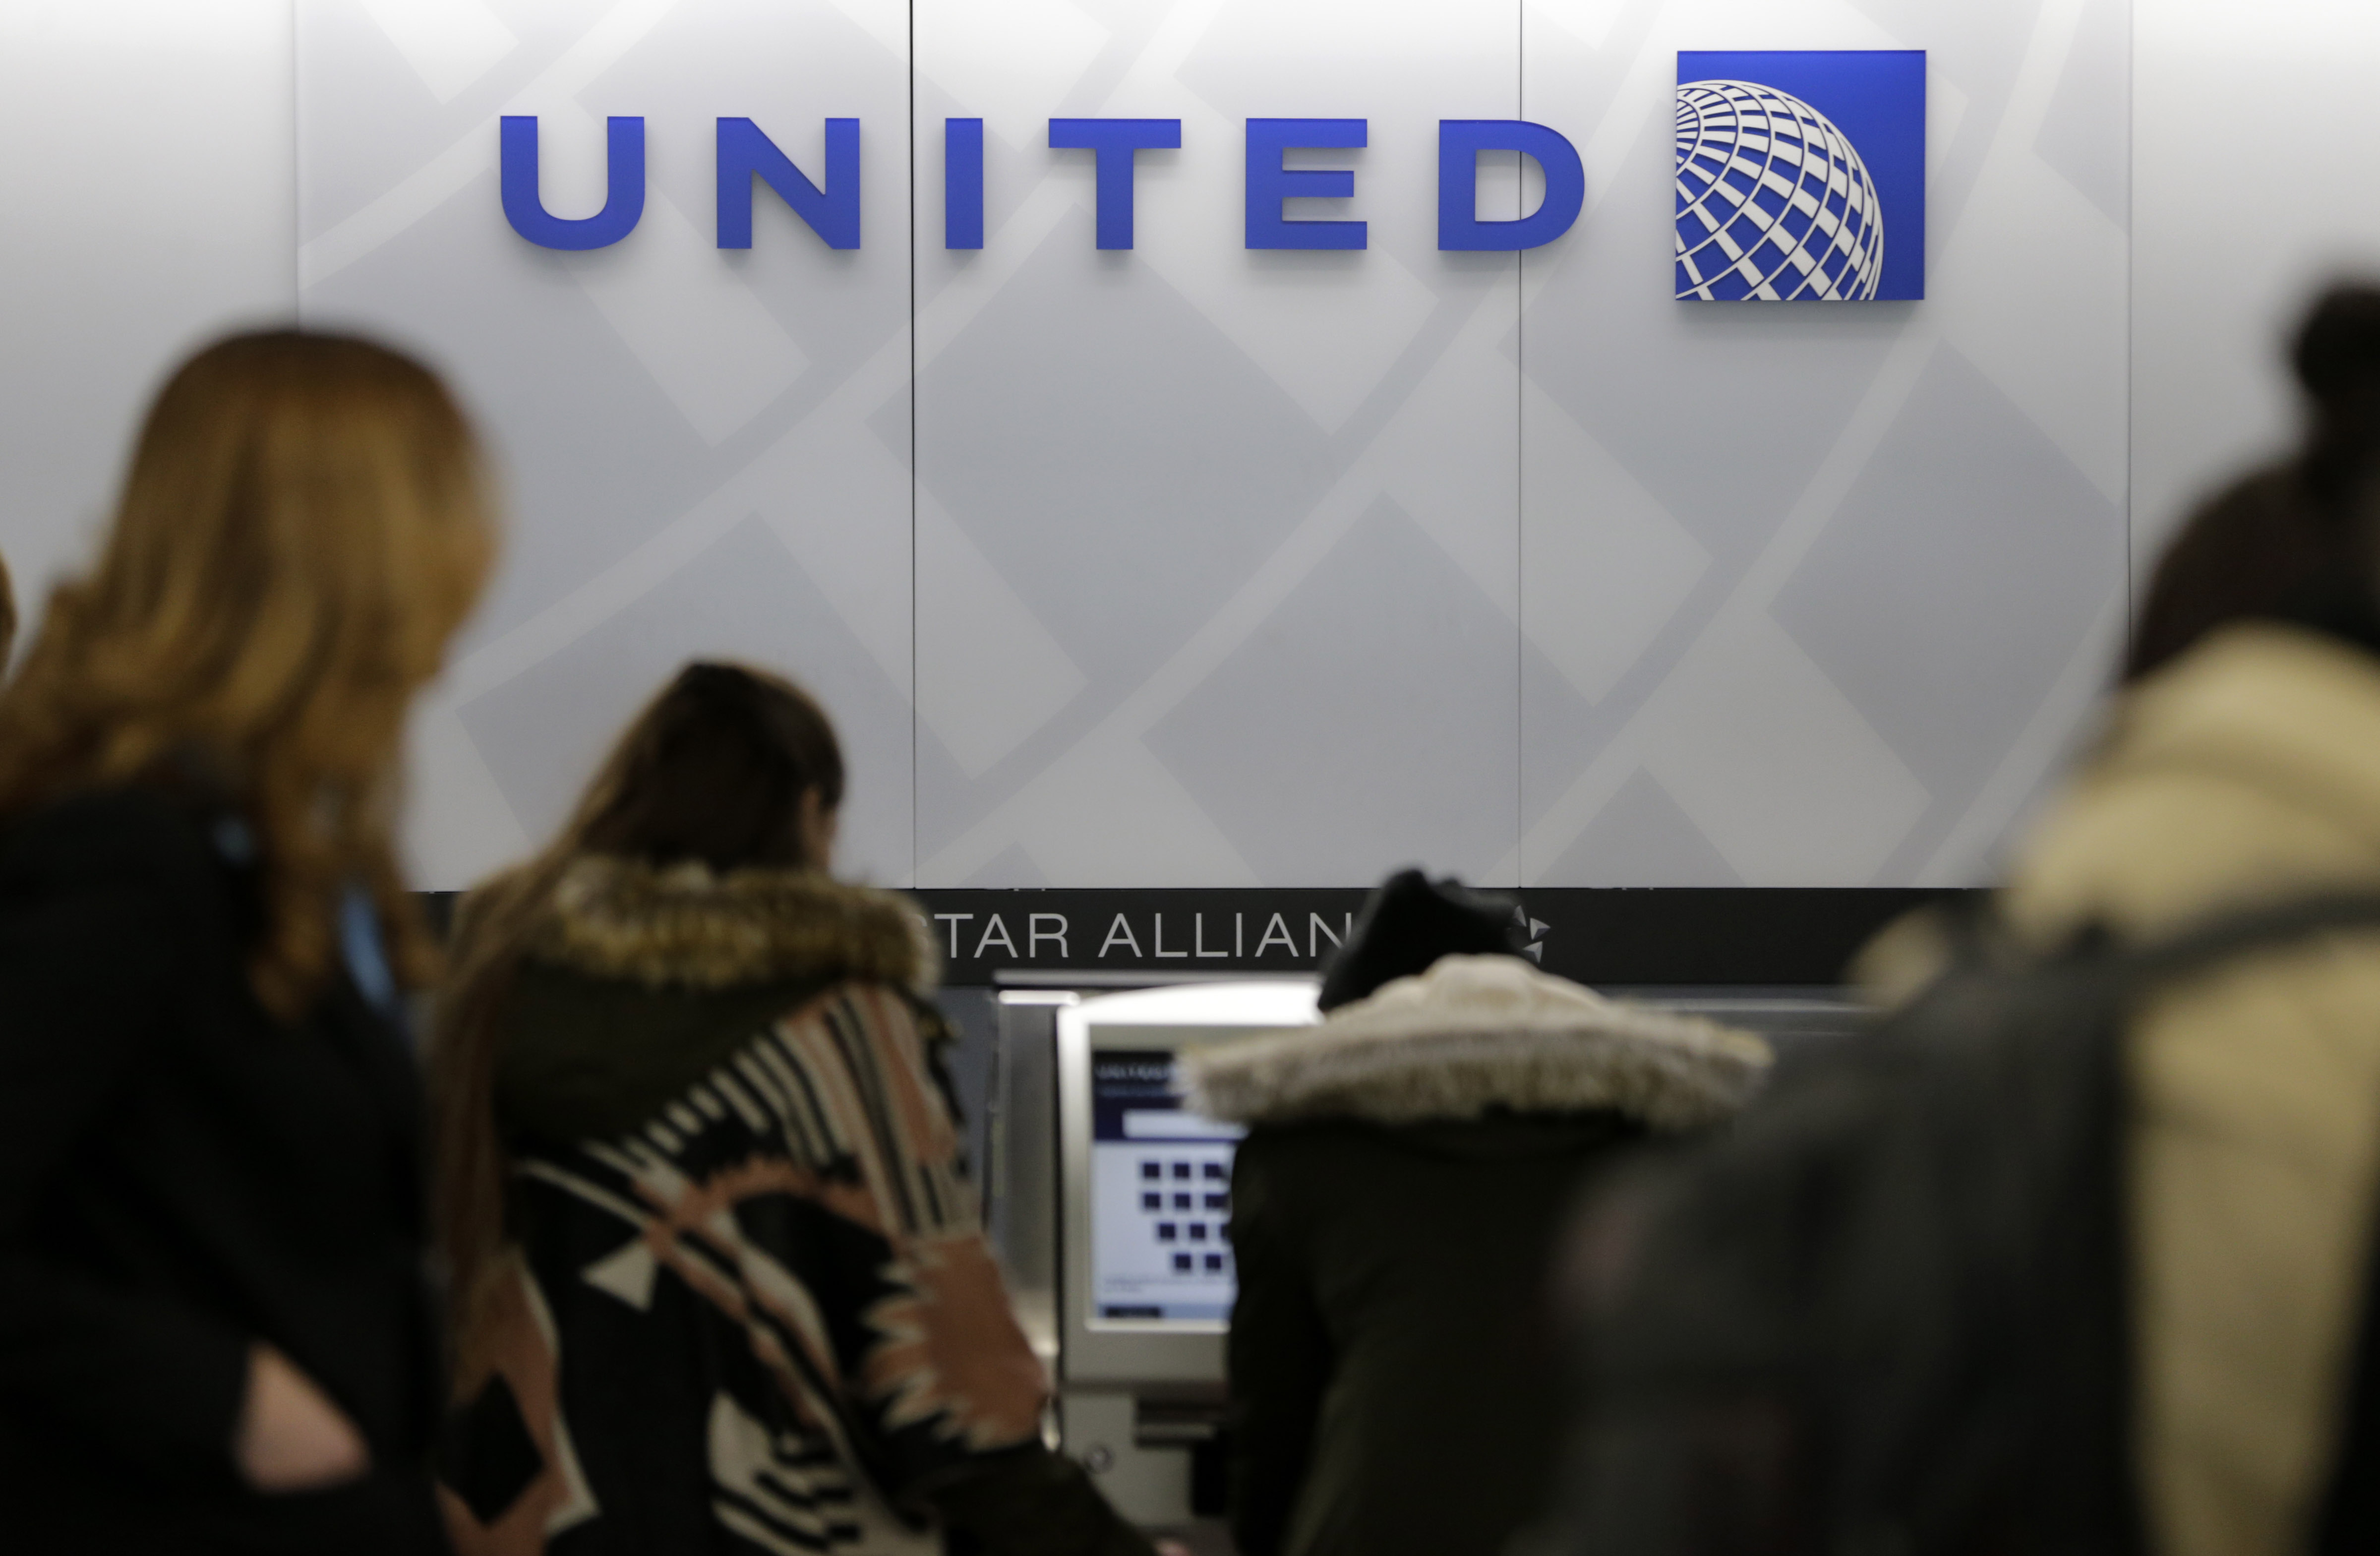 A United Airlines counter is seen at LaGuardia Airport in New York on March 15, 2017. (Seth Wenig&mdash;AP)